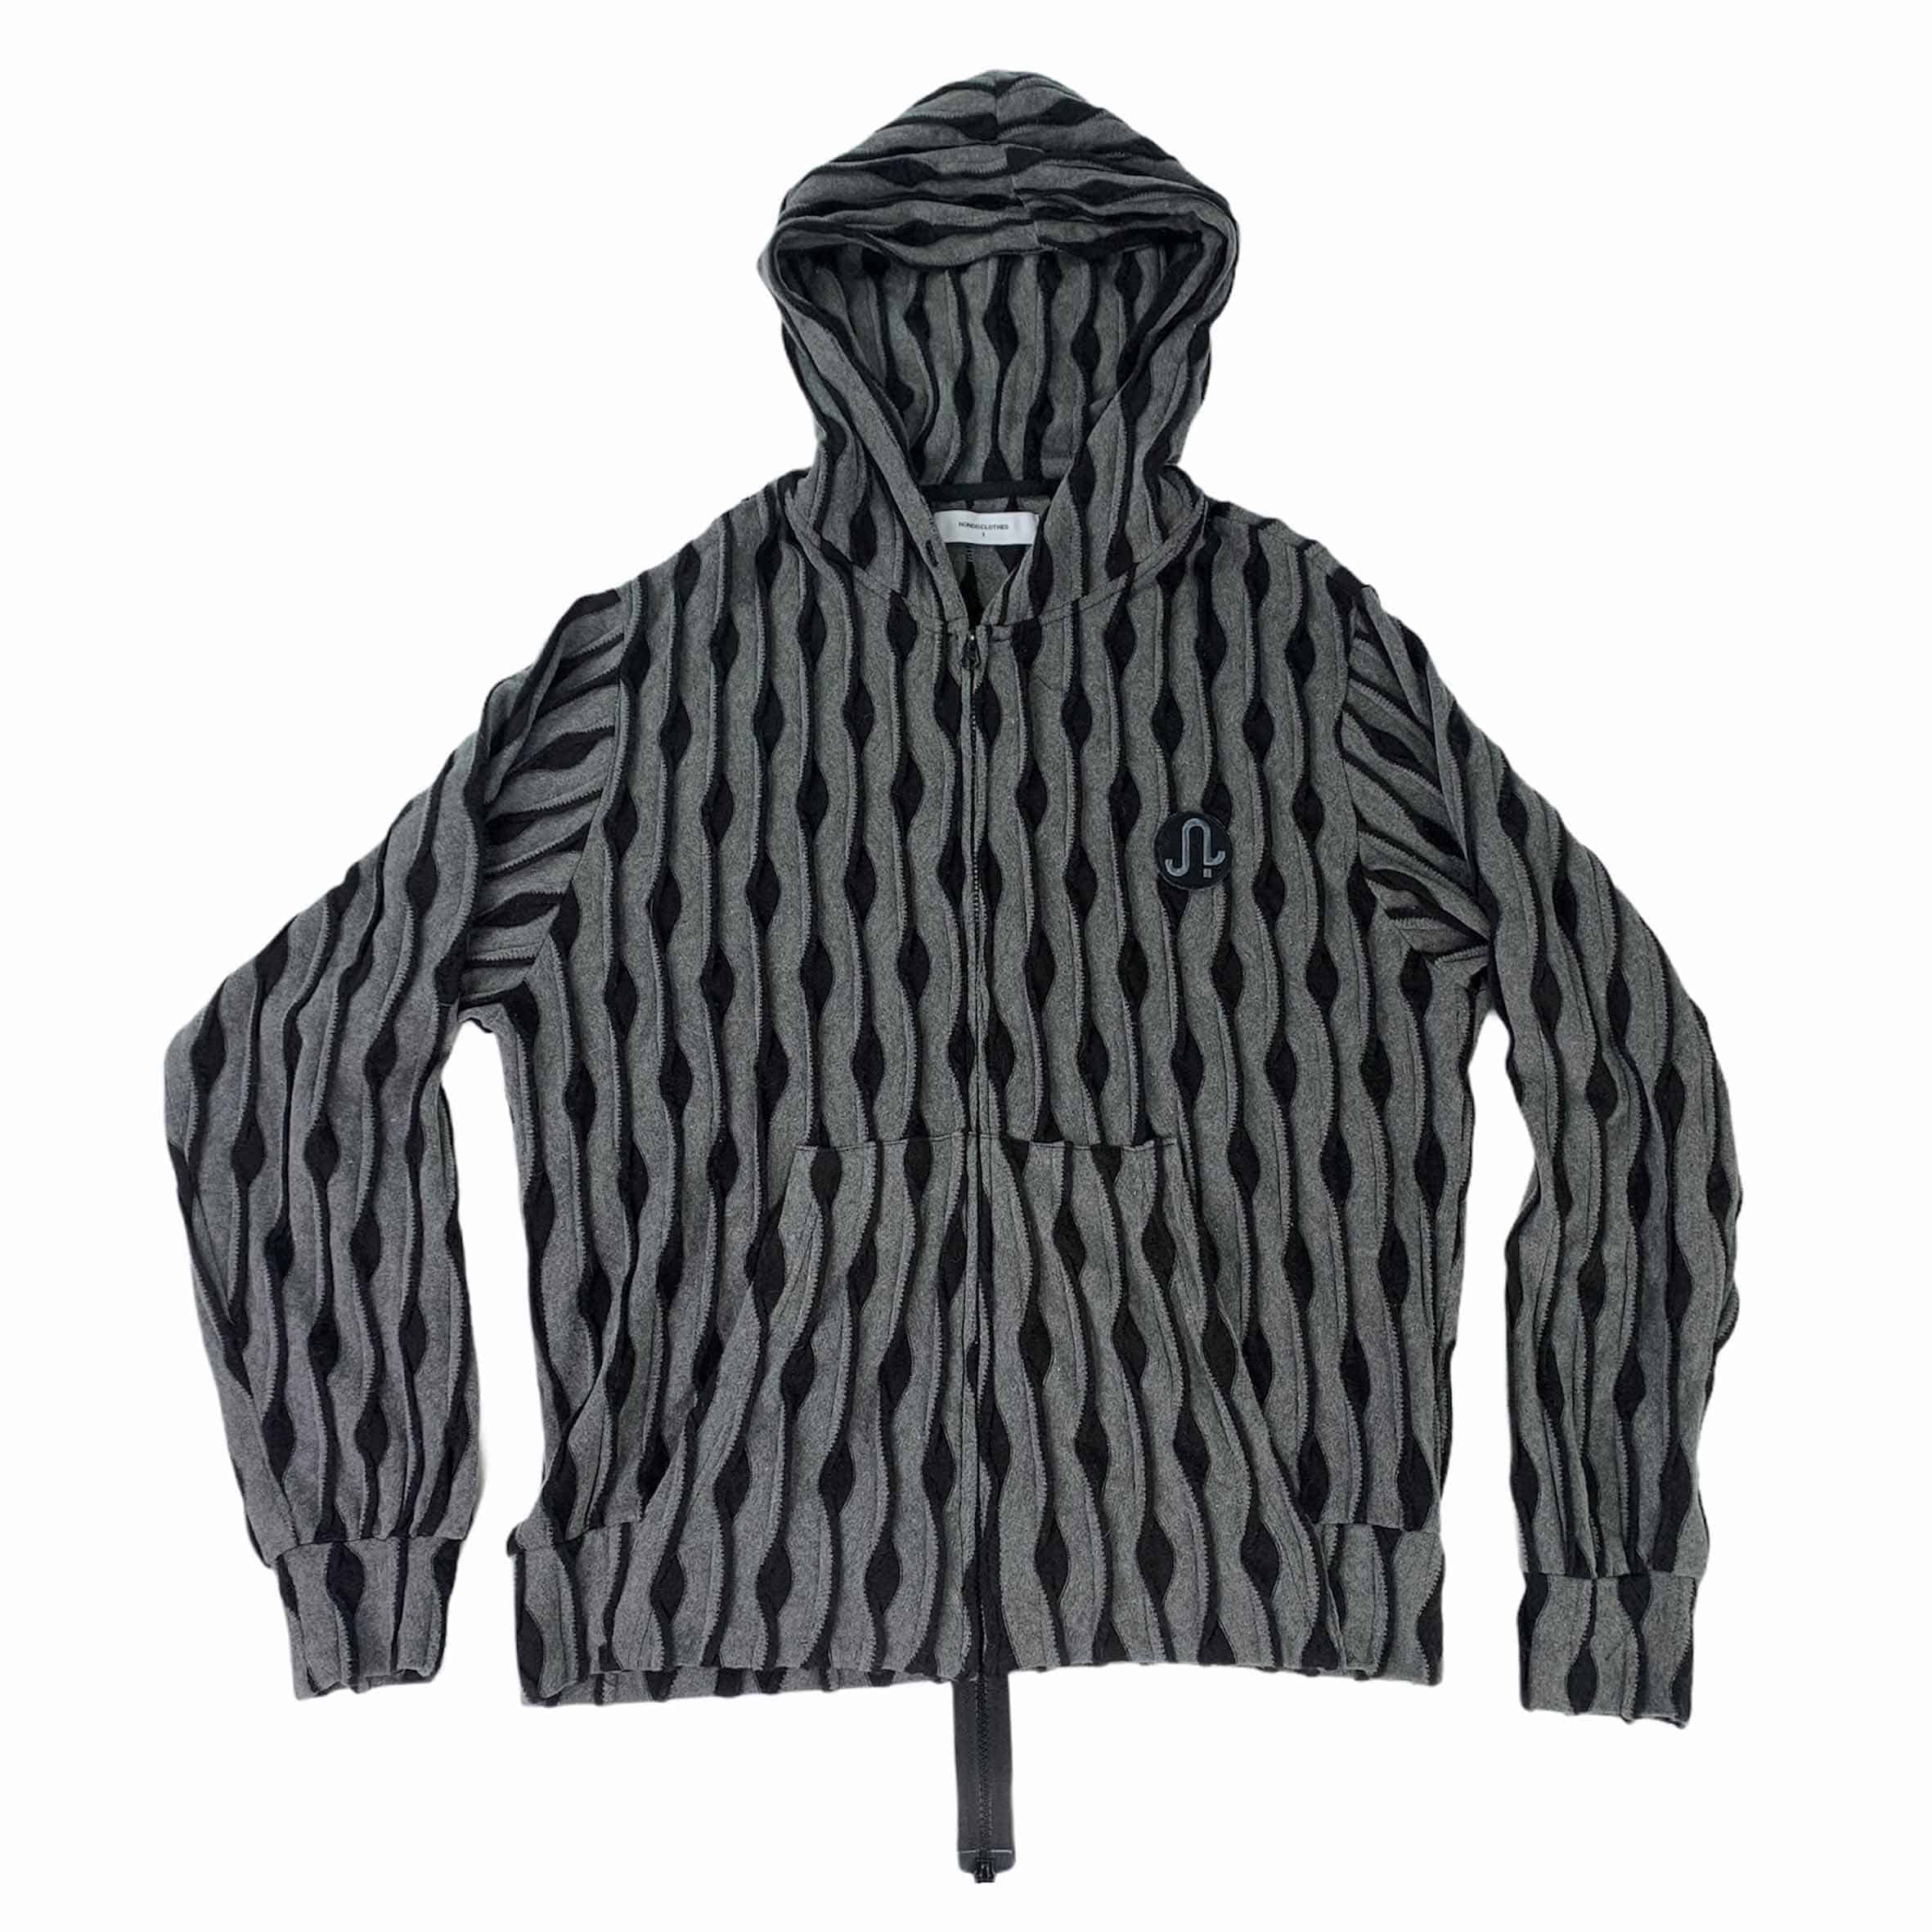 [Nondisclothes] Black Wave Knit Hoodie Zip-up - Size 1